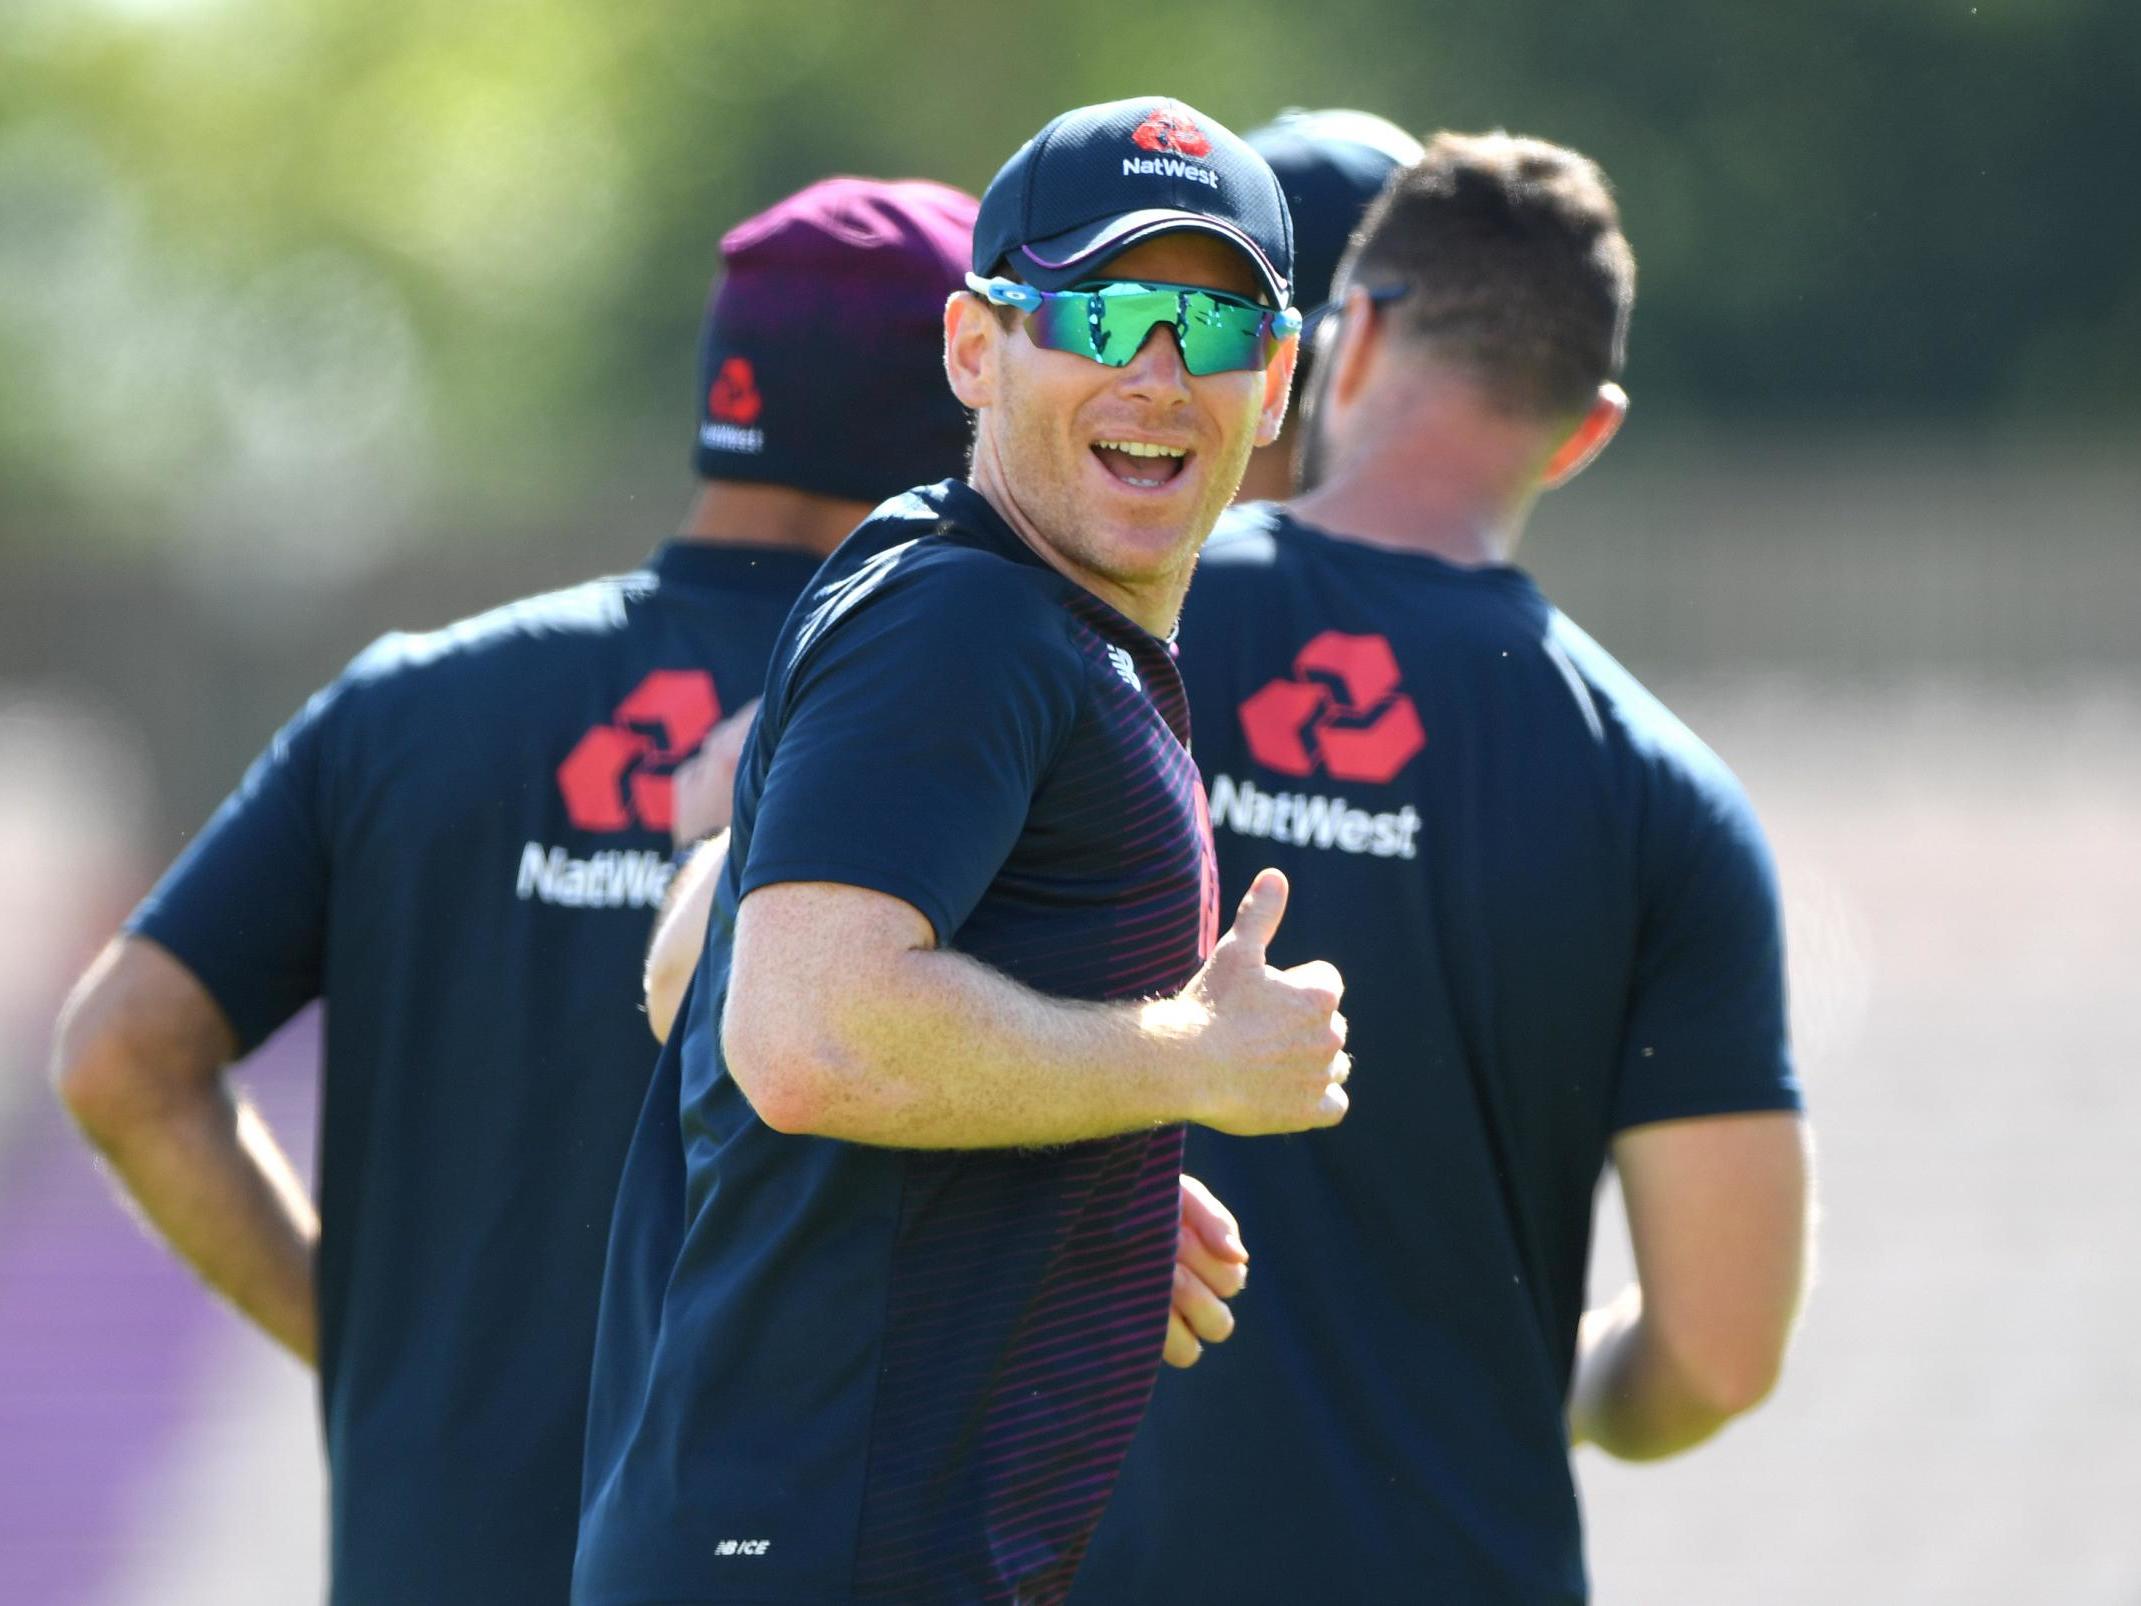 England have named a 14-man squad